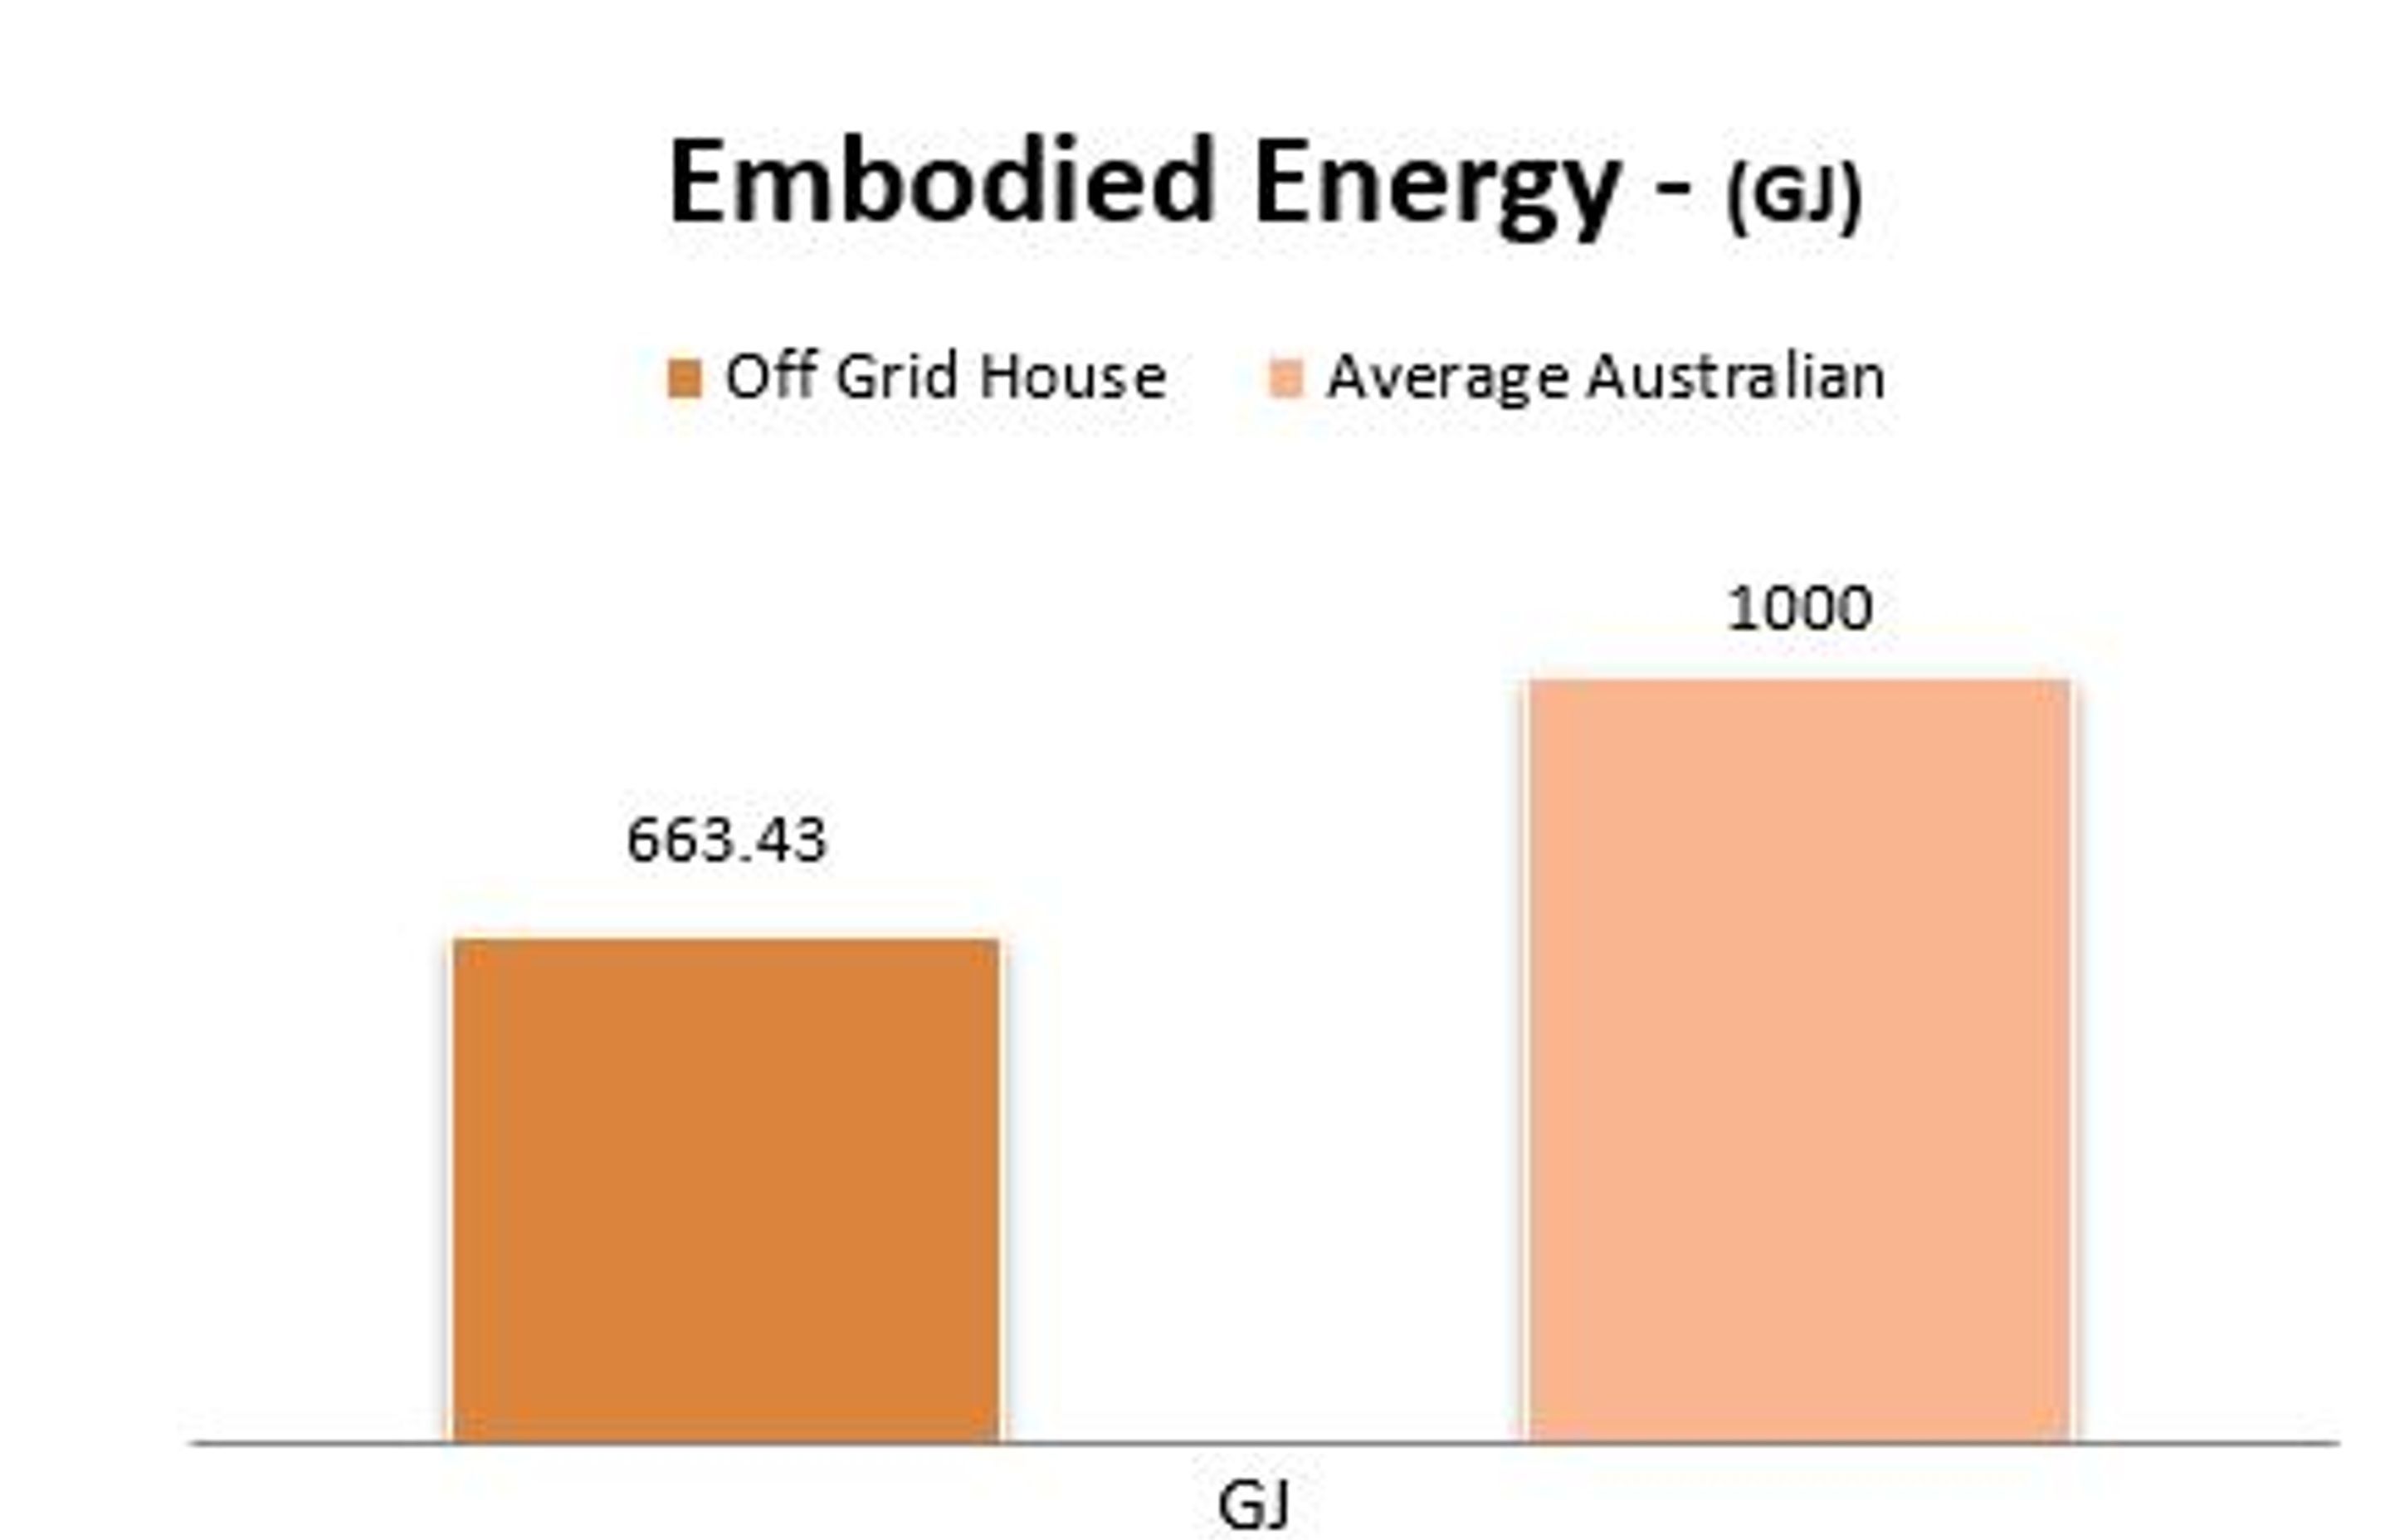 The embodied energy of a typical house in Australia compared to that of Off Grid House.